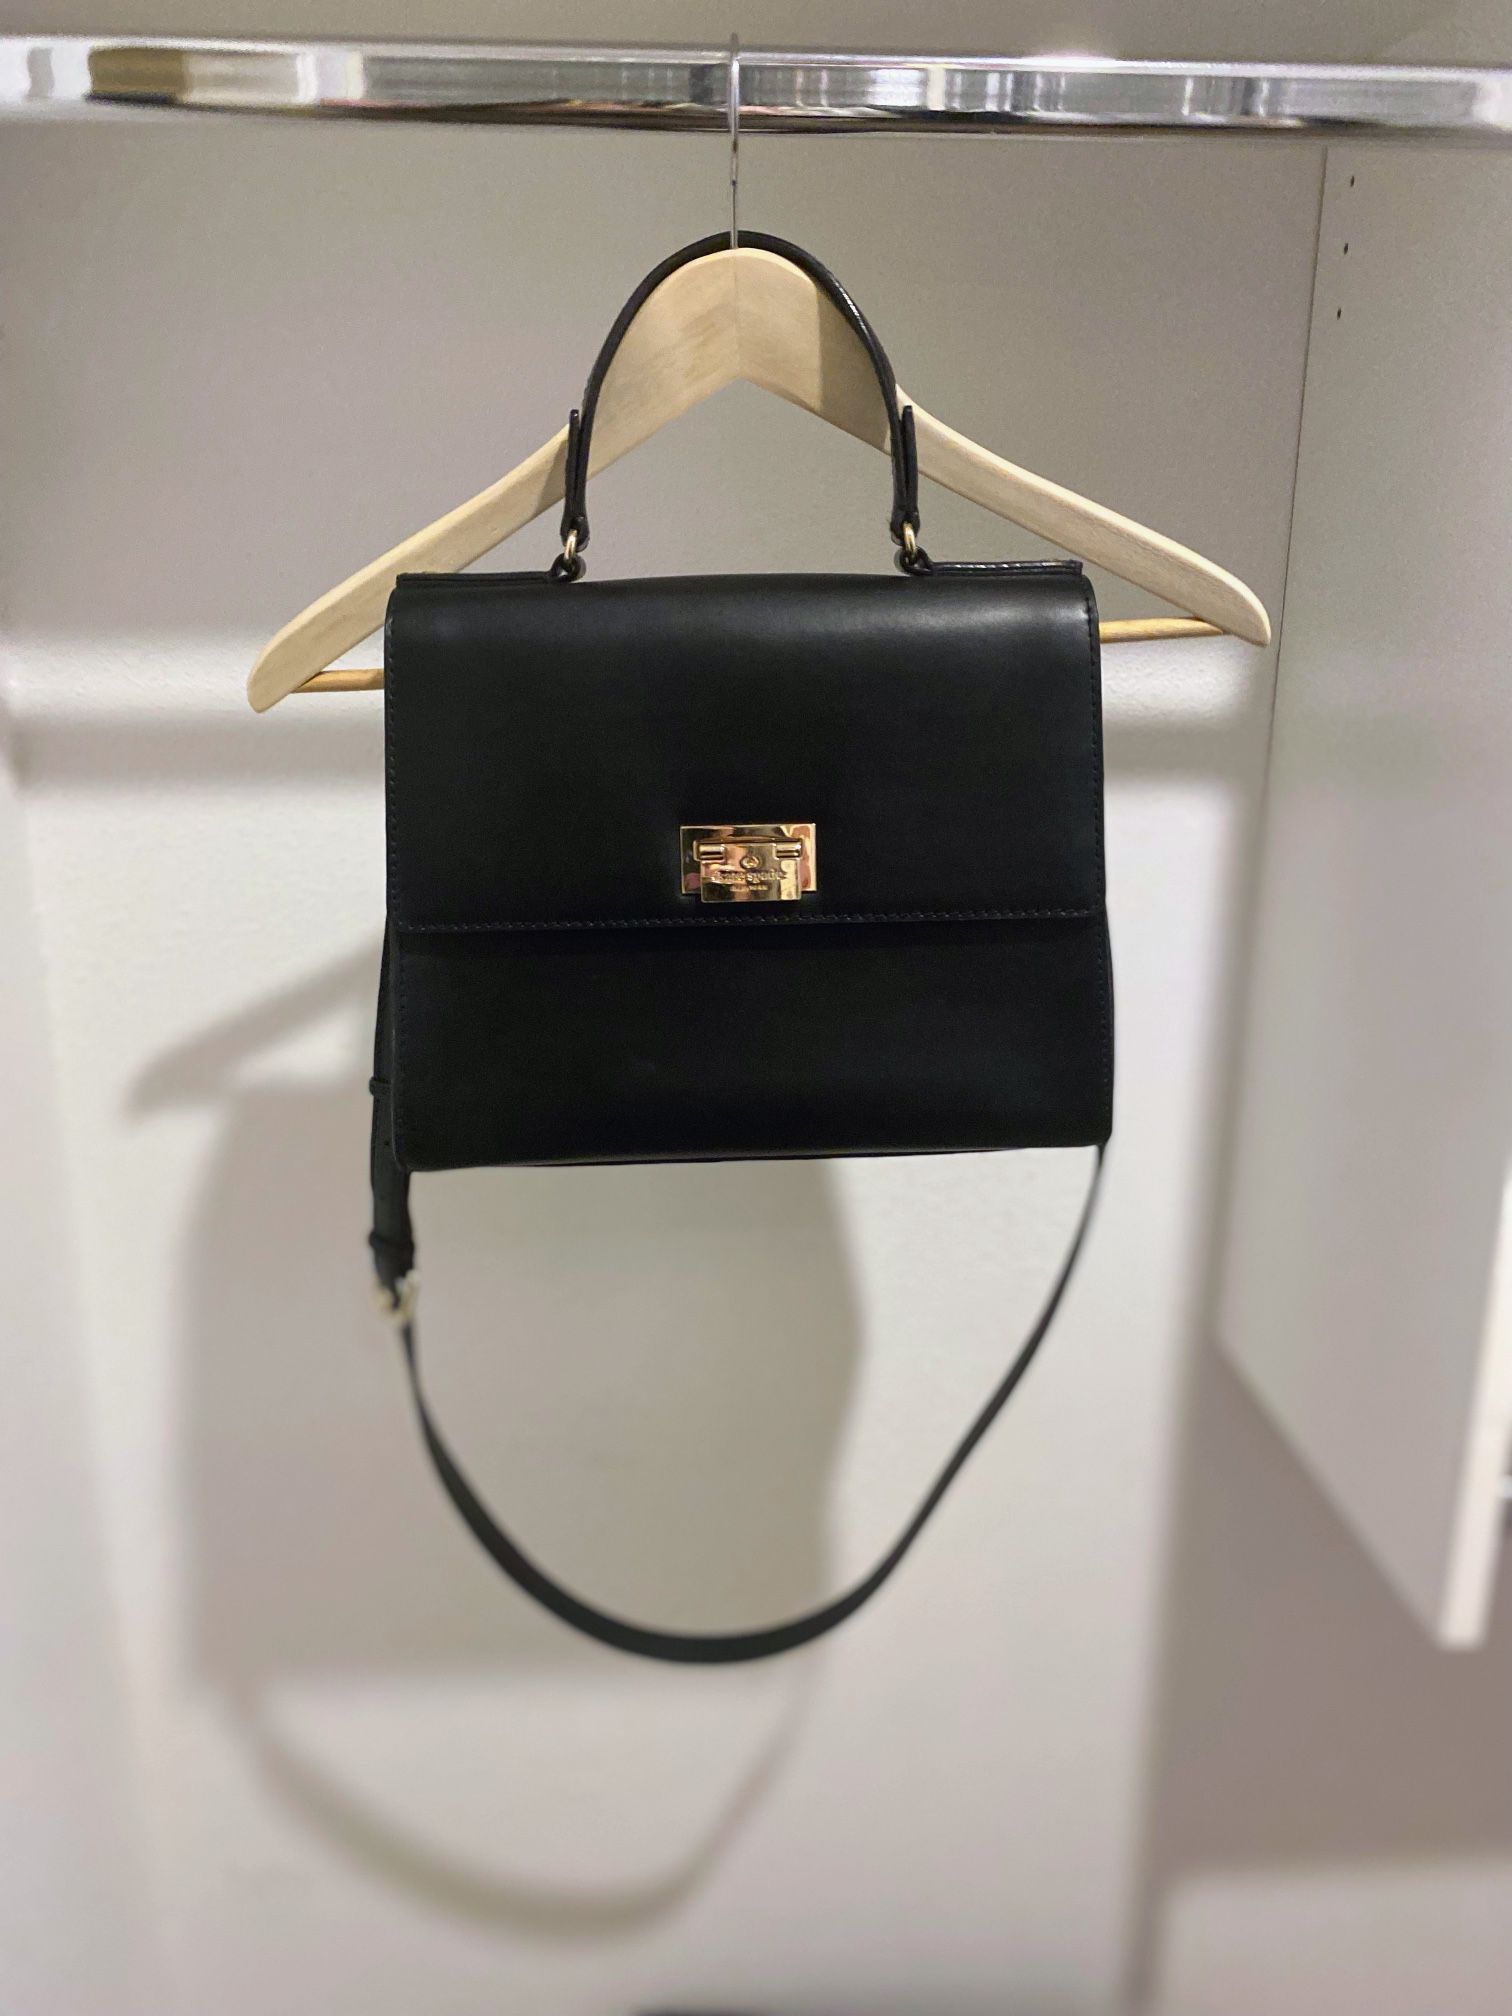 Kate Spade New York Black Leather Satchel With Long Strap